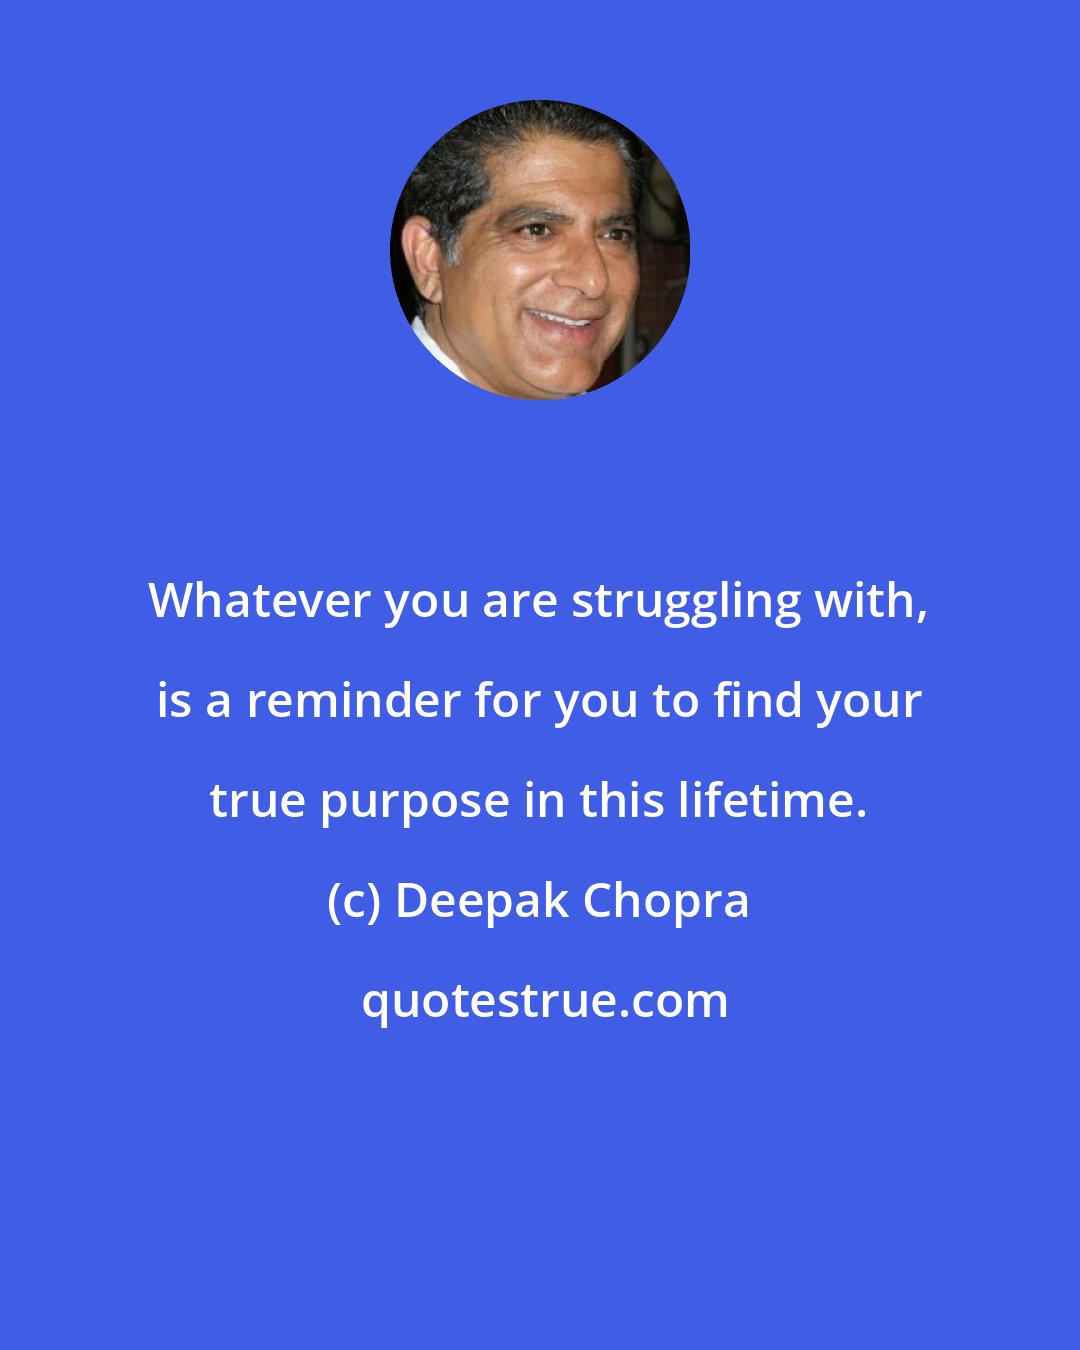 Deepak Chopra: Whatever you are struggling with, is a reminder for you to find your true purpose in this lifetime.